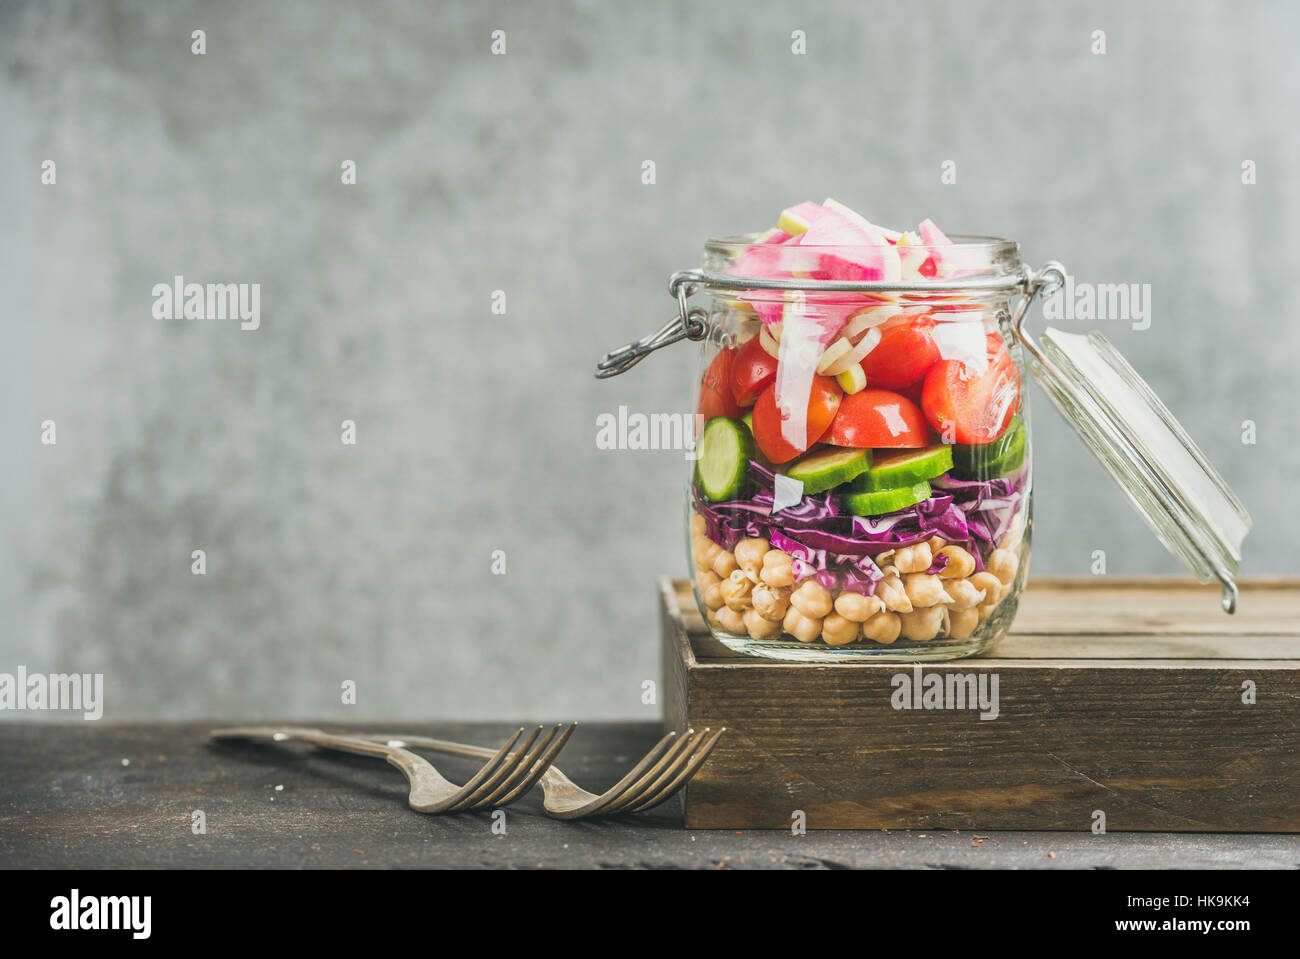 Healthy take-away lunch jar. Vegetable and chickpea sprout vegan salad in glass jar, grey concrete wall background, copy space, selective focus. Clean Stock Photo